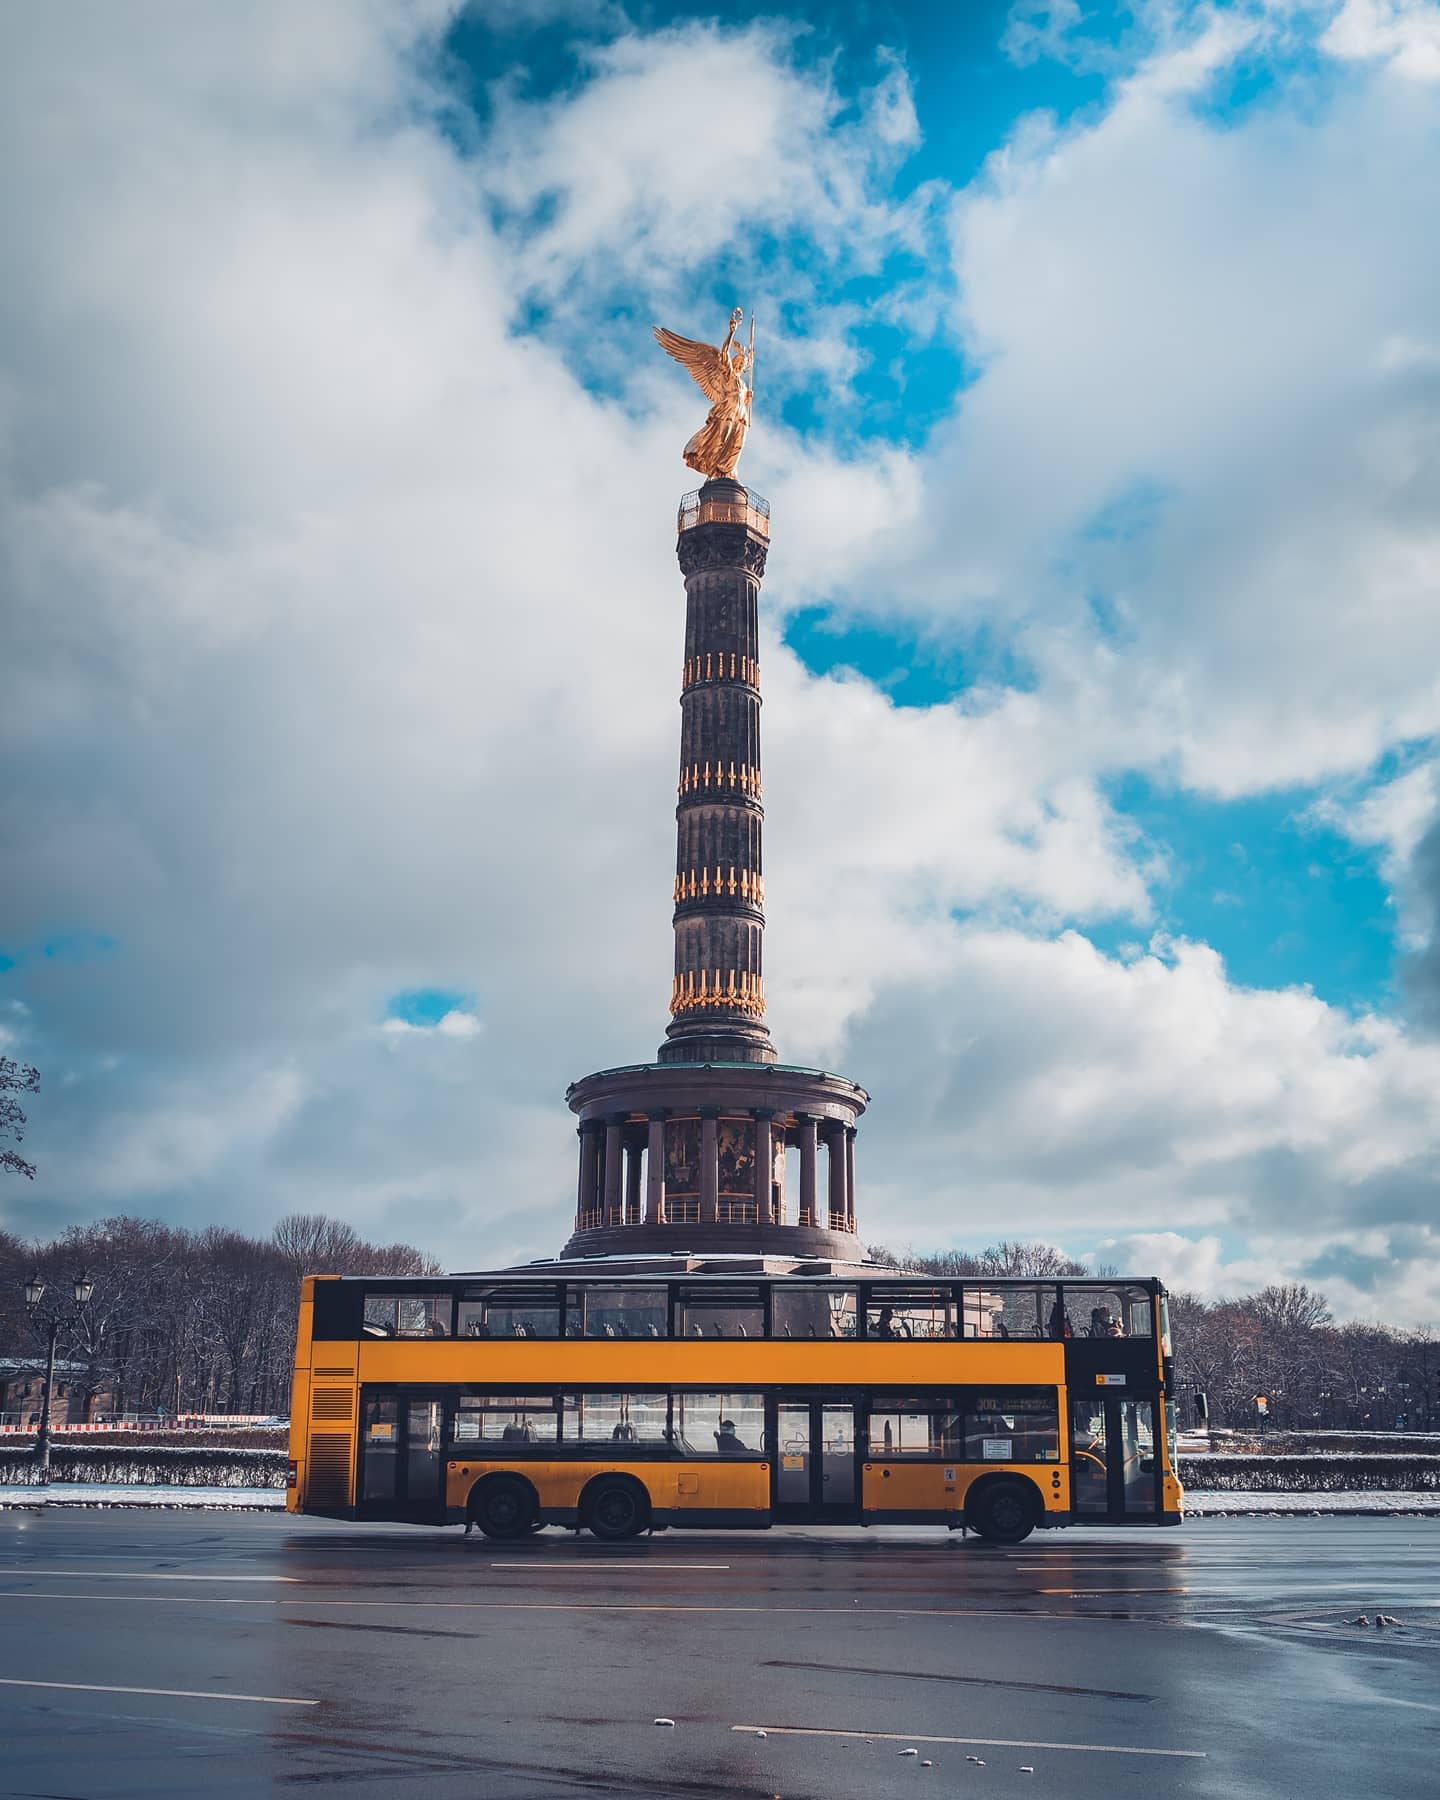 When the Sun shines through the clouds for a brief moment and lights up the scene. 🌤️😍
.
.
.
.
.
.
.
#bestofberlin #victorycolumn #berlingermany #sunshine #onacloudyday⛅ #travelphotography #nakedplanet
@sonyalpha